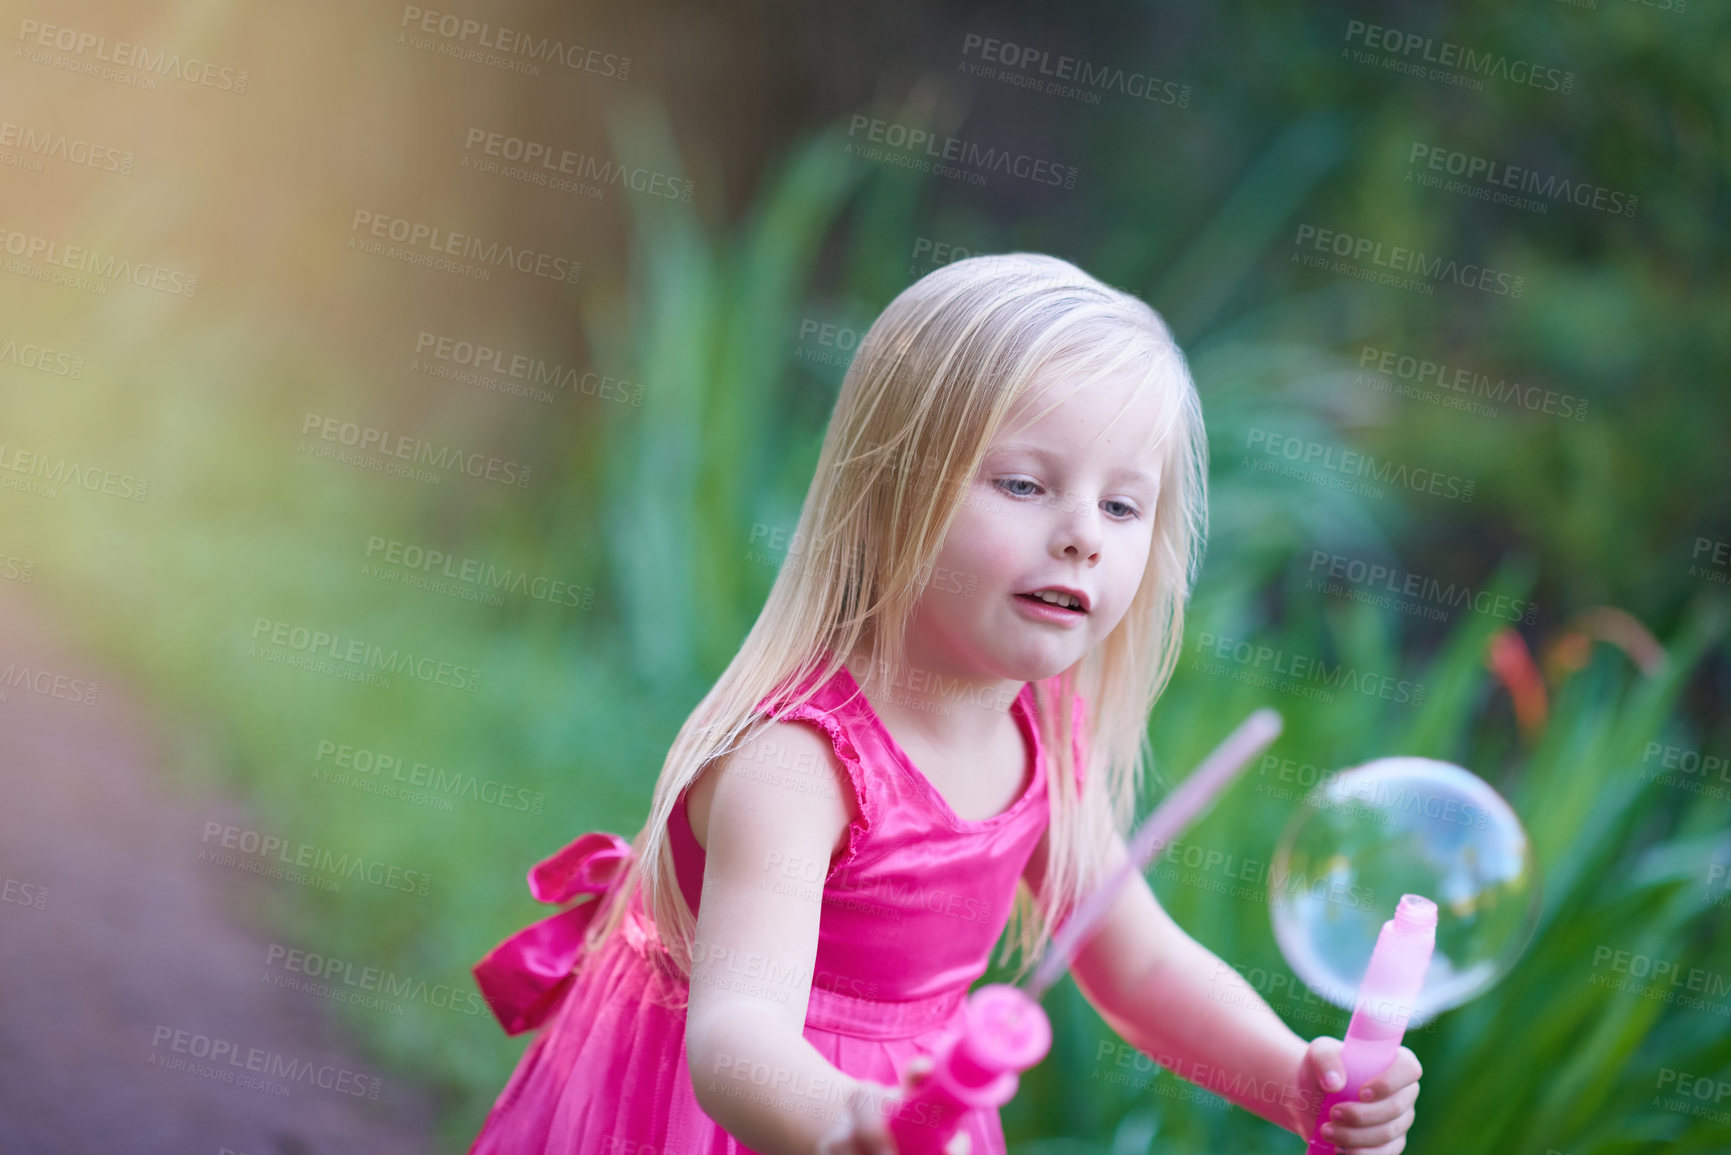 Buy stock photo Cropped shot of a cute little girl playing outside